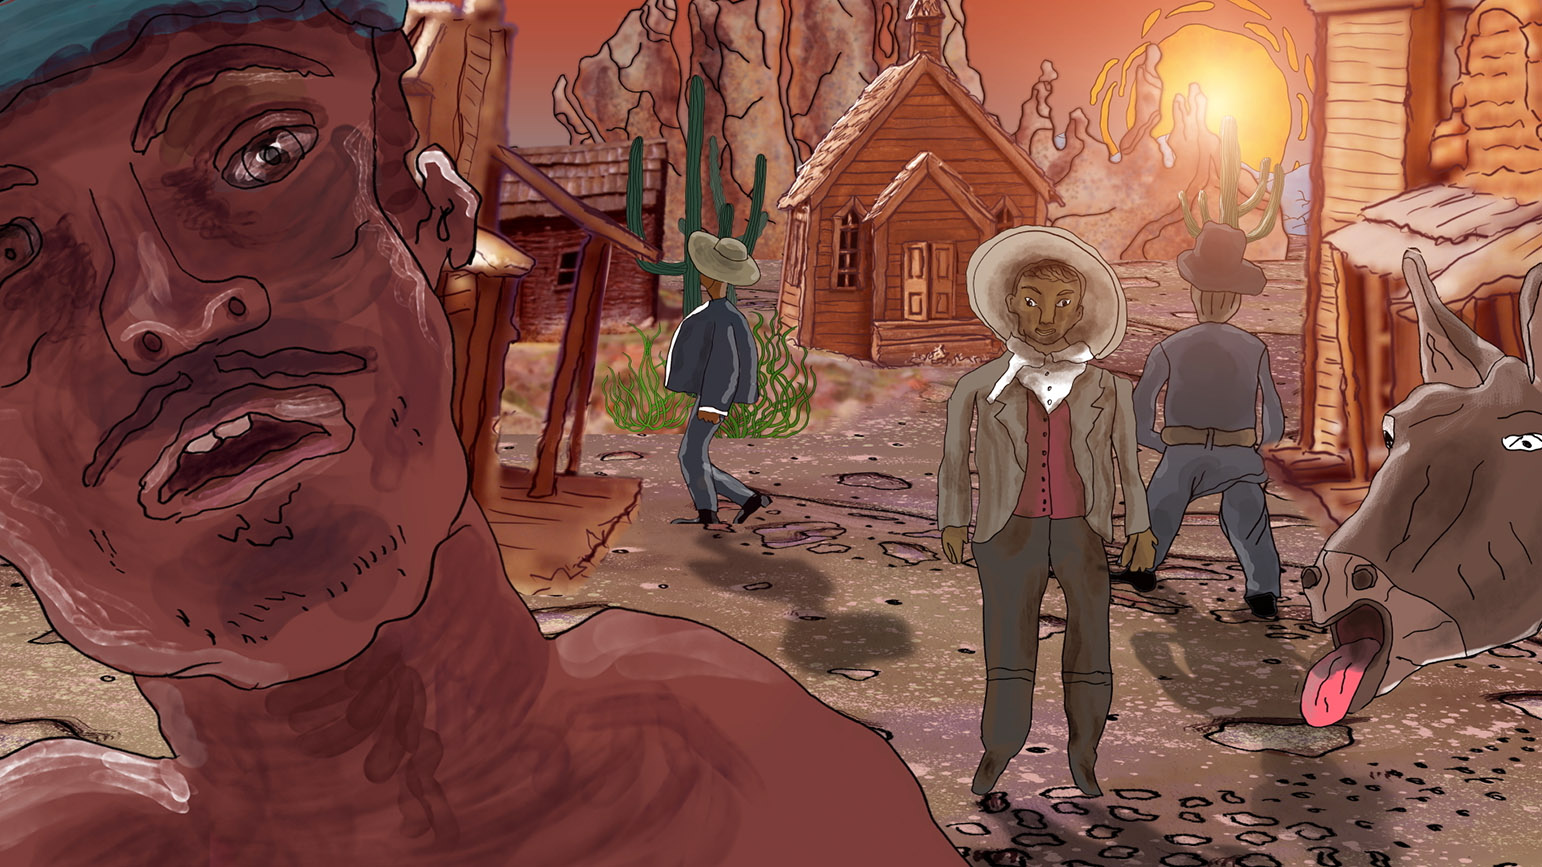 Still from animated film "Stinkhorn" showing several people in a western town with a hot sun